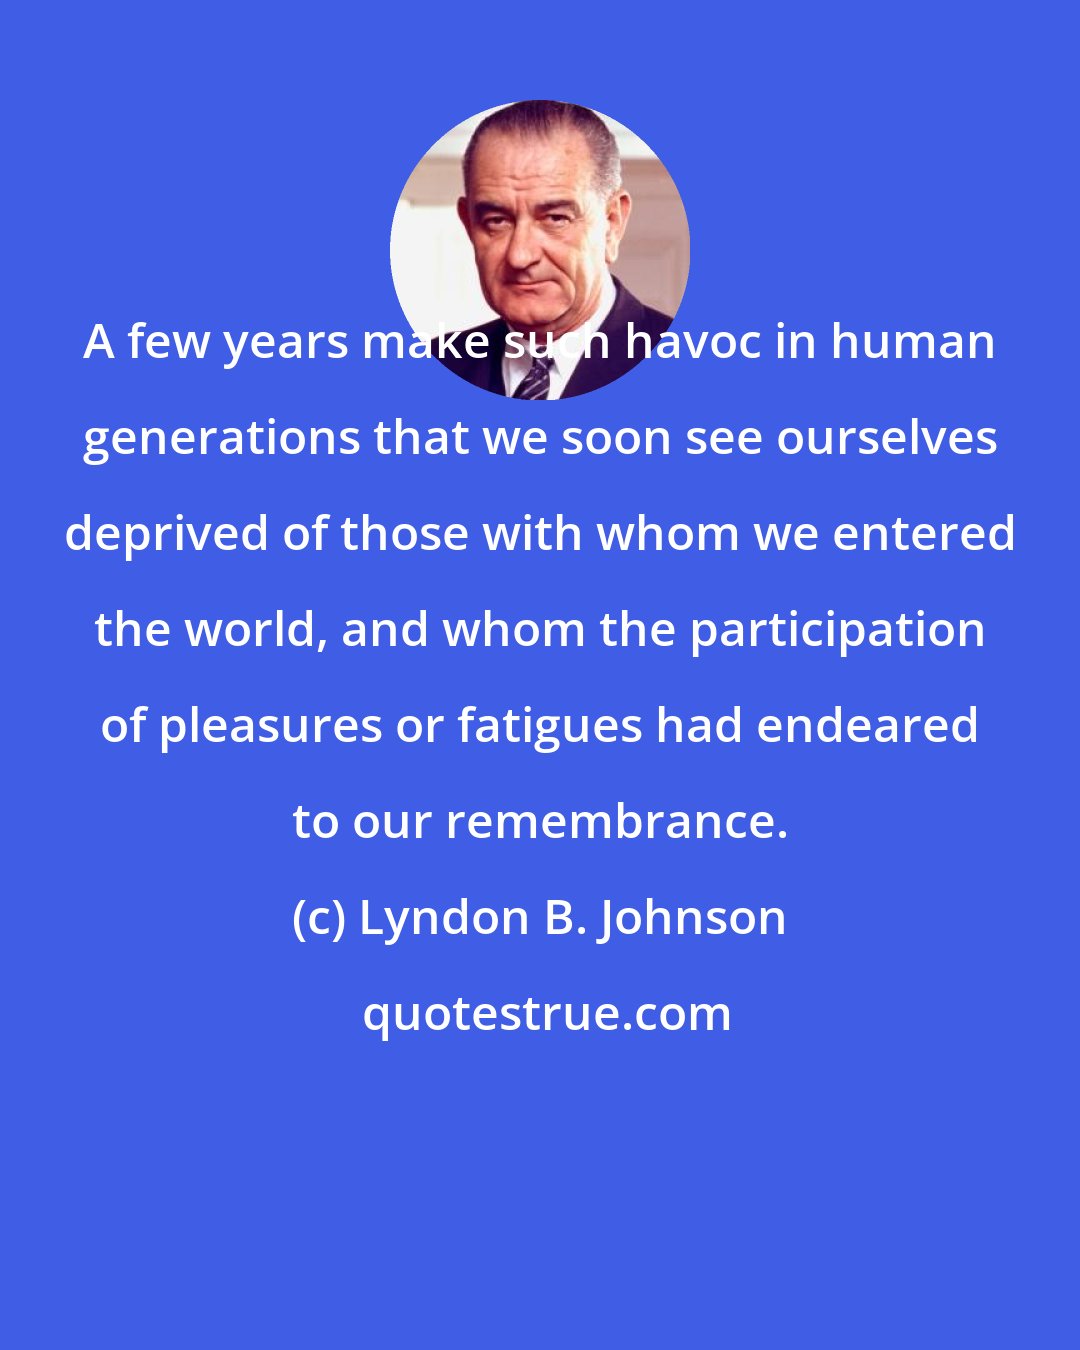 Lyndon B. Johnson: A few years make such havoc in human generations that we soon see ourselves deprived of those with whom we entered the world, and whom the participation of pleasures or fatigues had endeared to our remembrance.